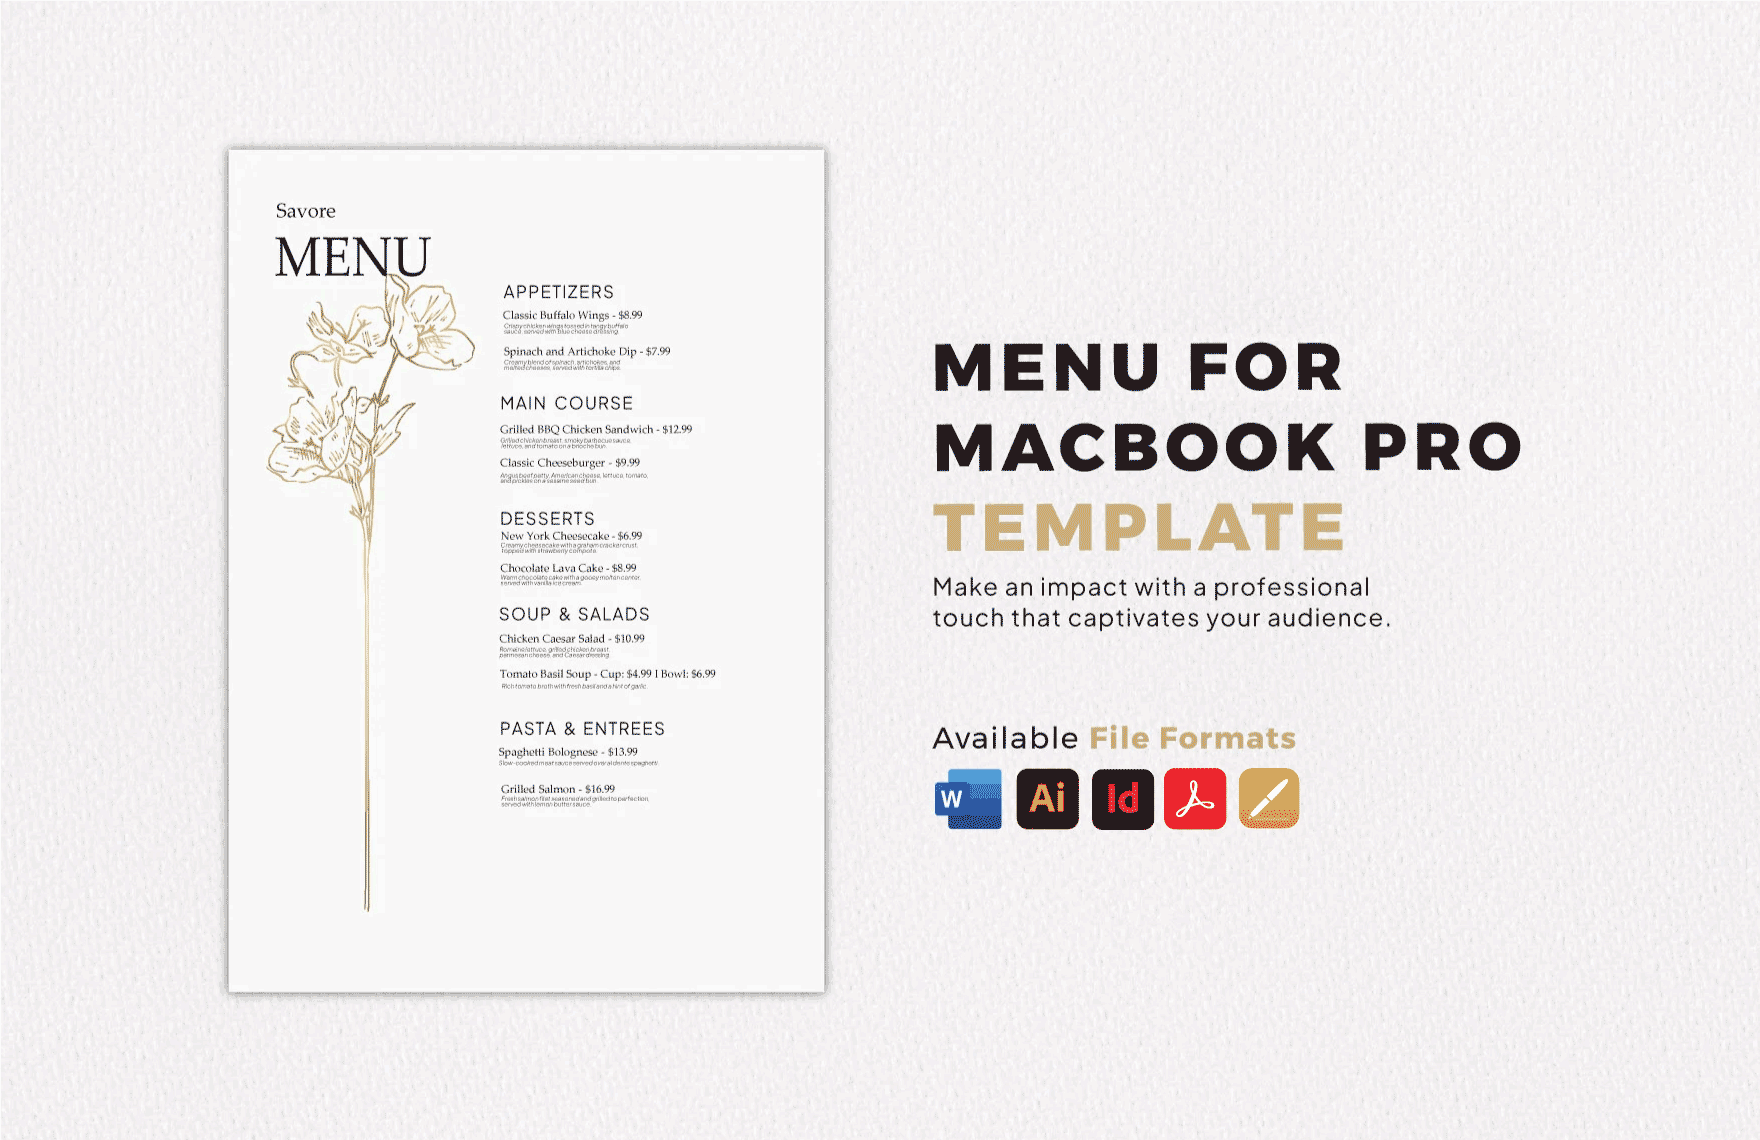 Free Menu for Macbook Pro Template in Word, PDF, Illustrator, Apple Pages, InDesign